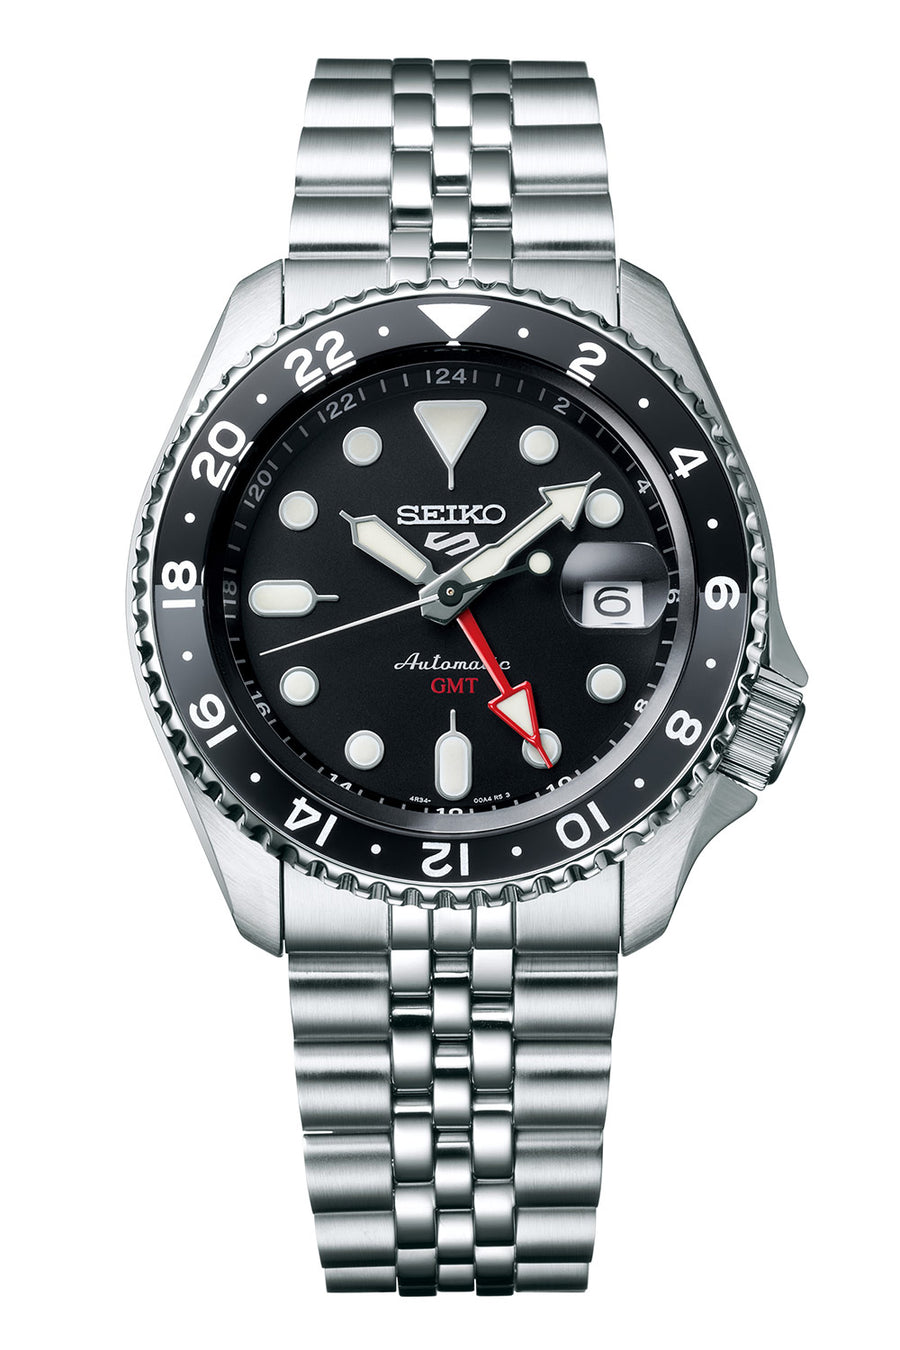 Seiko 5 100M GMT Style Black Dial Automatic Watch SSK001K1